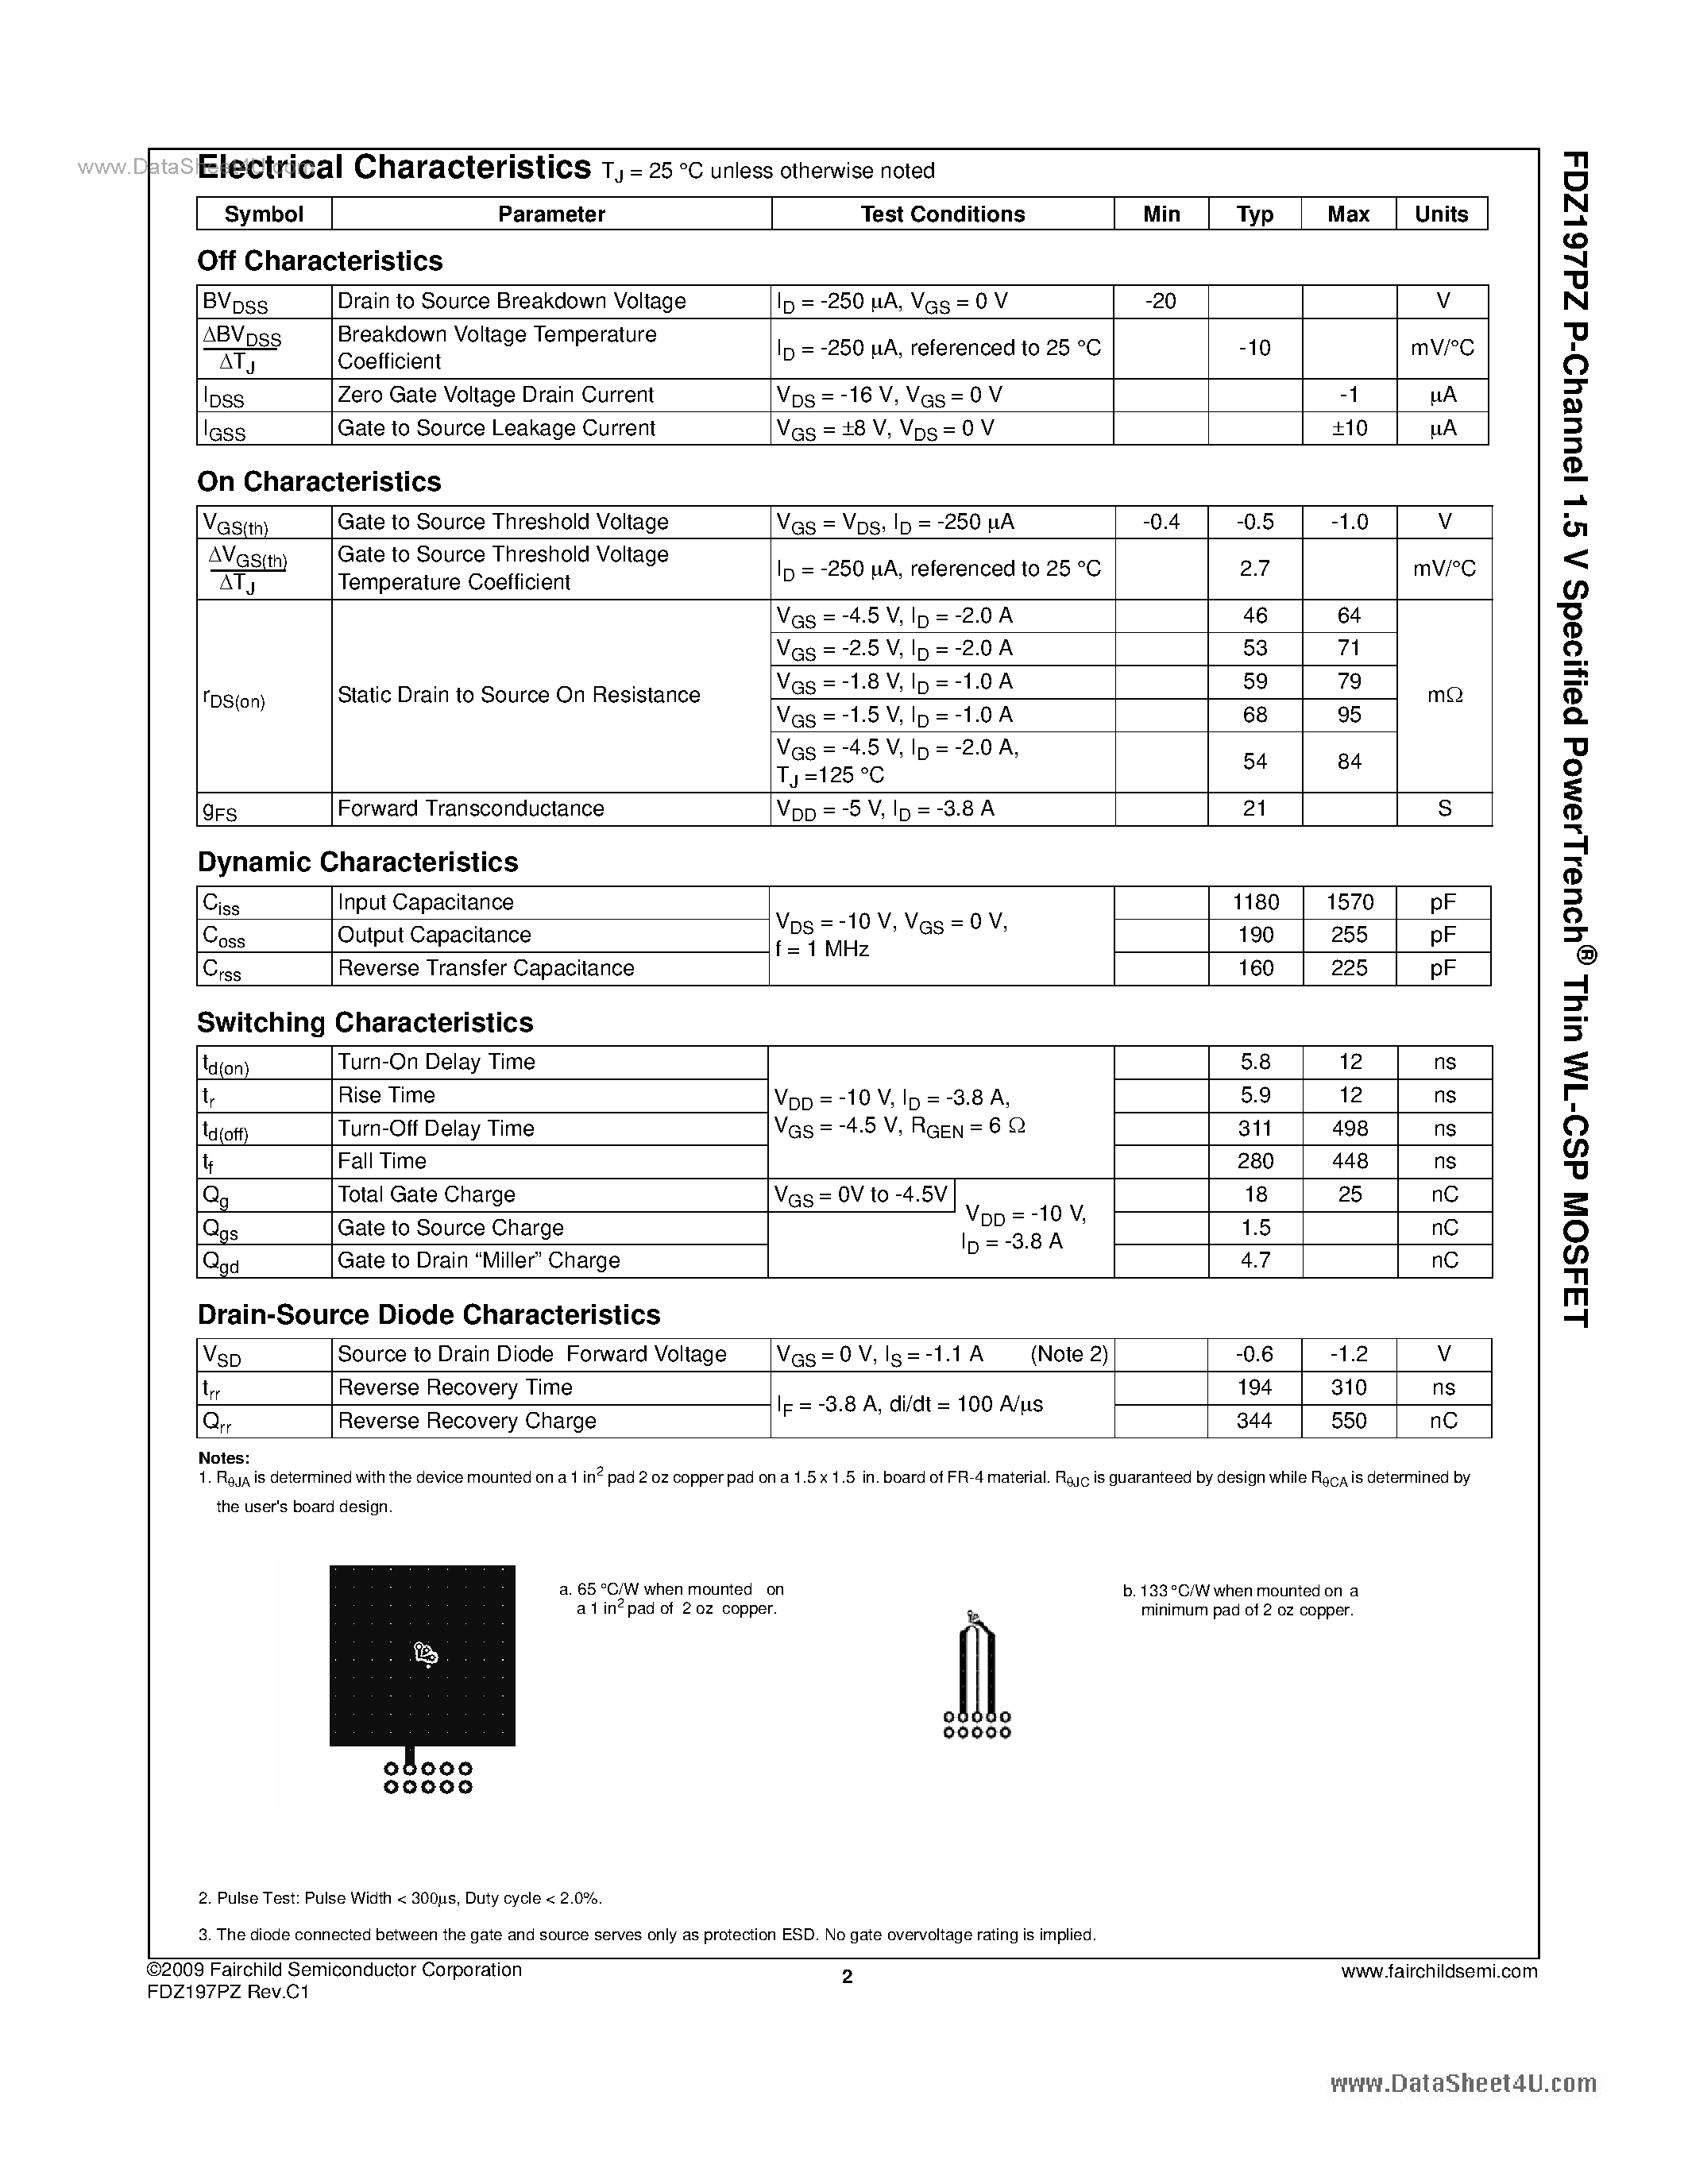 Datasheet FDZ197PZ - -20V P-Channel 1.5V Specified PowerTrench Thin WL-CSP MOSFET page 2